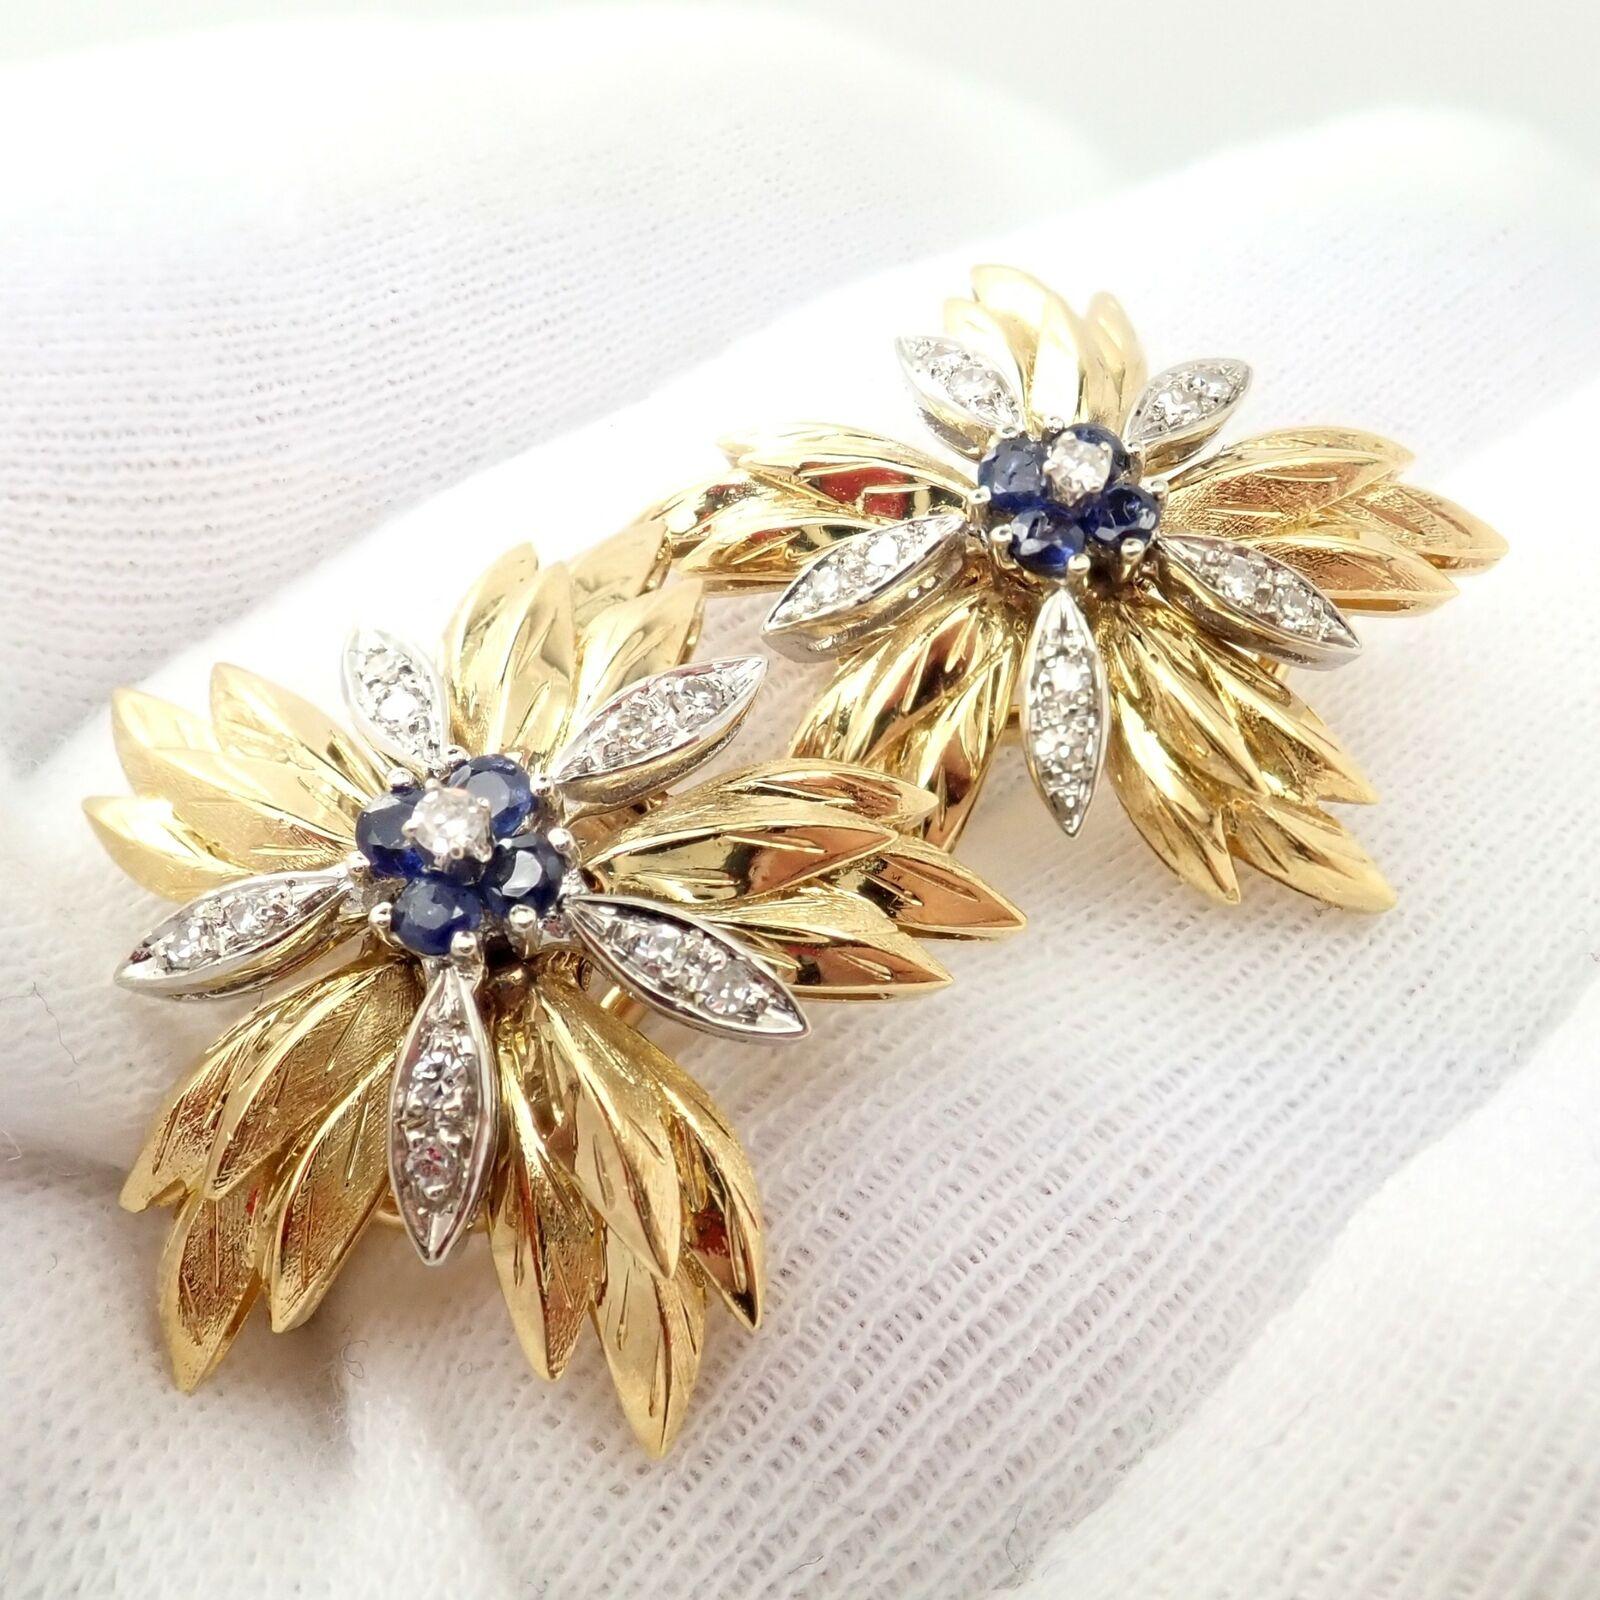 Vintage Tiffany & Co. Diamond Sapphire Yellow Gold Flower Earrings In Excellent Condition For Sale In Holland, PA